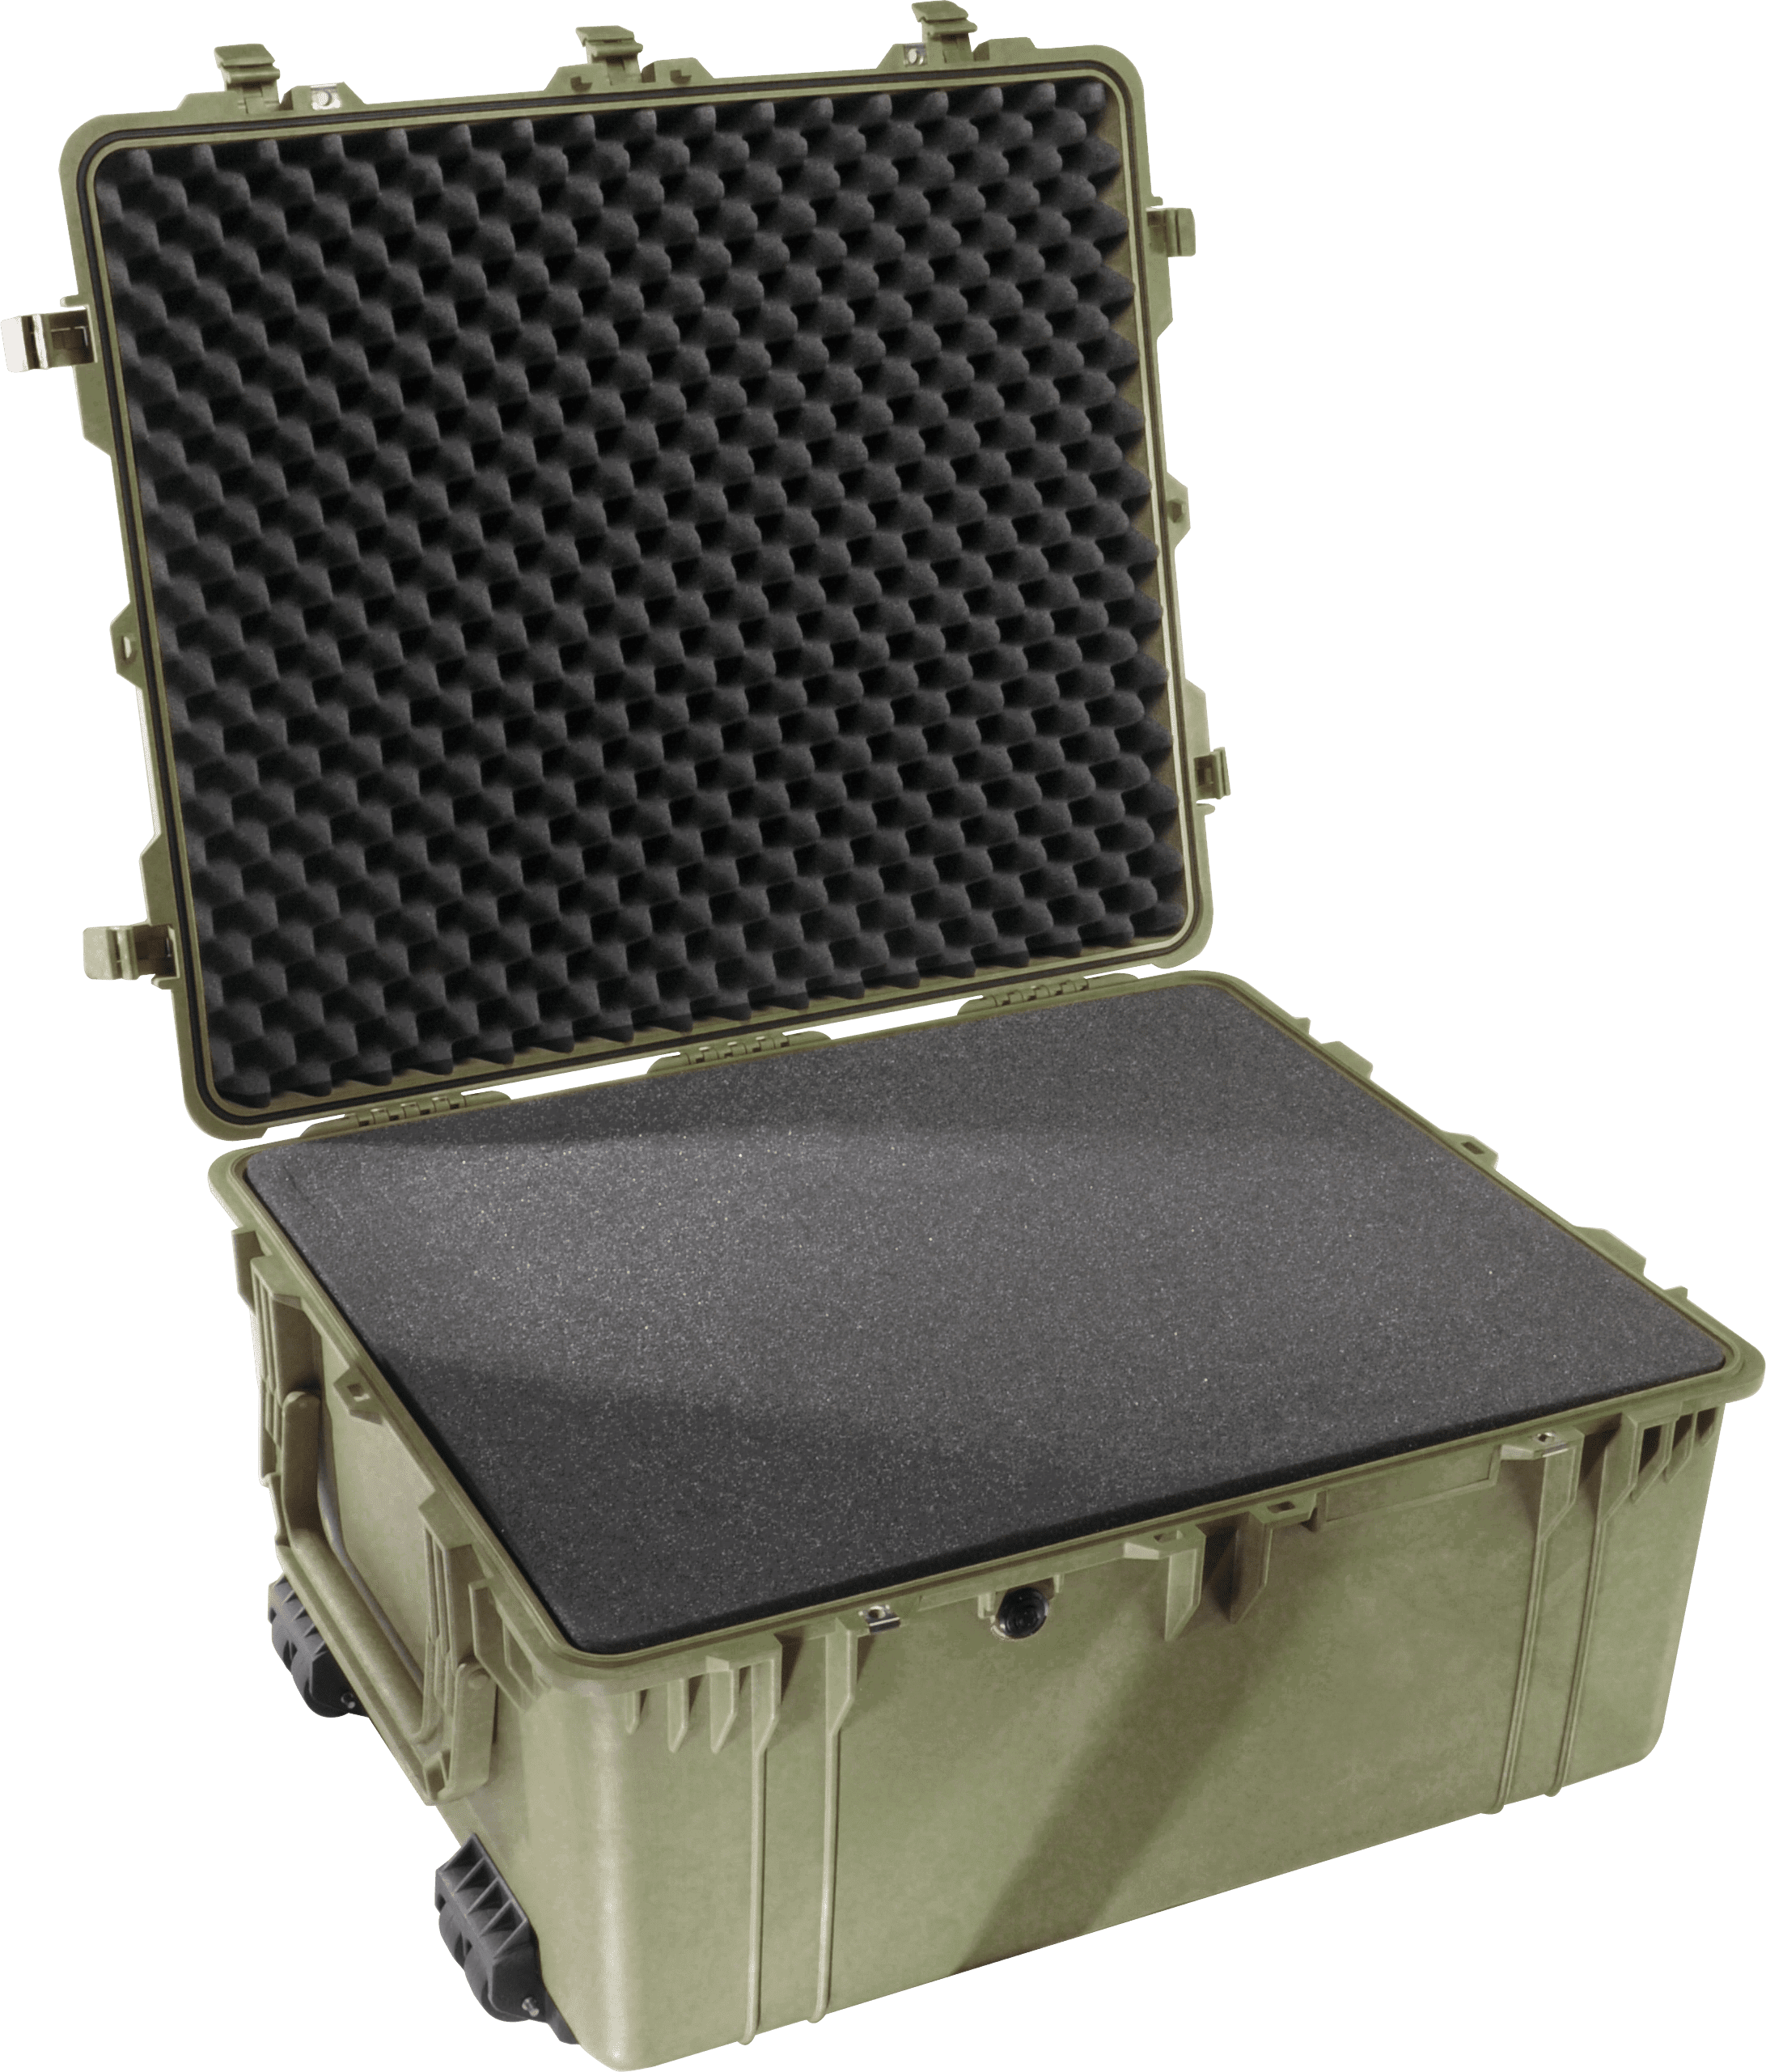 Pelican Products 1690 Protector Transport Case - OD Green, Foam